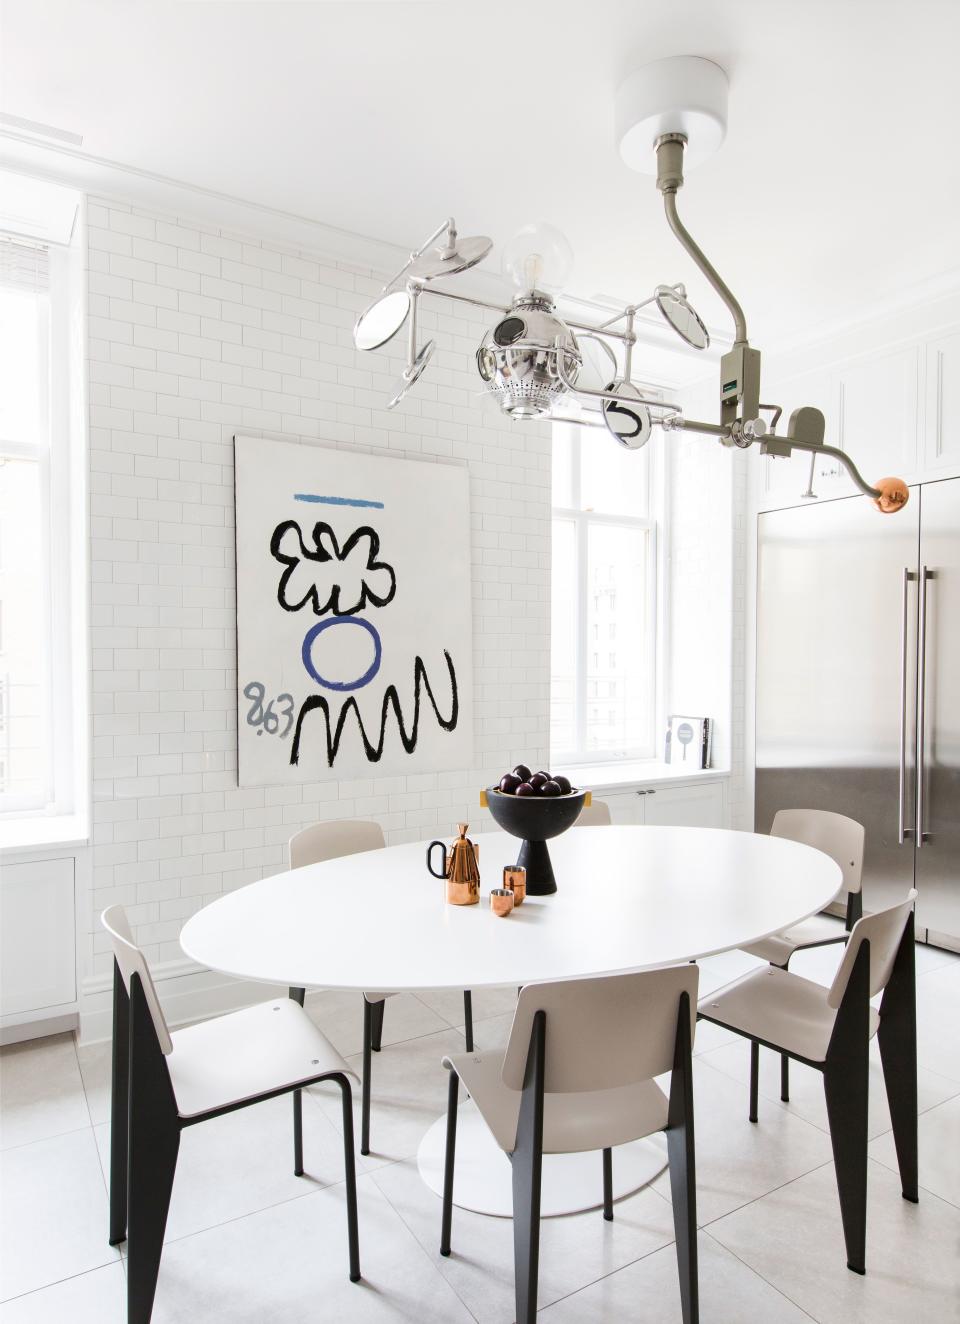 The kitchen, which was covered in white subway tiles in a nod to New York City, features a distinctive light pendant made from an old surgical light fused with Sofie Refer’s “Mega Bulb” glass fixture for andTrandition. Jean Prouvé’s famous chairs surround Eero Saarinen’s equally iconic pedestal table. The abstract artwork is a painting by Raymond Hendler called The General.